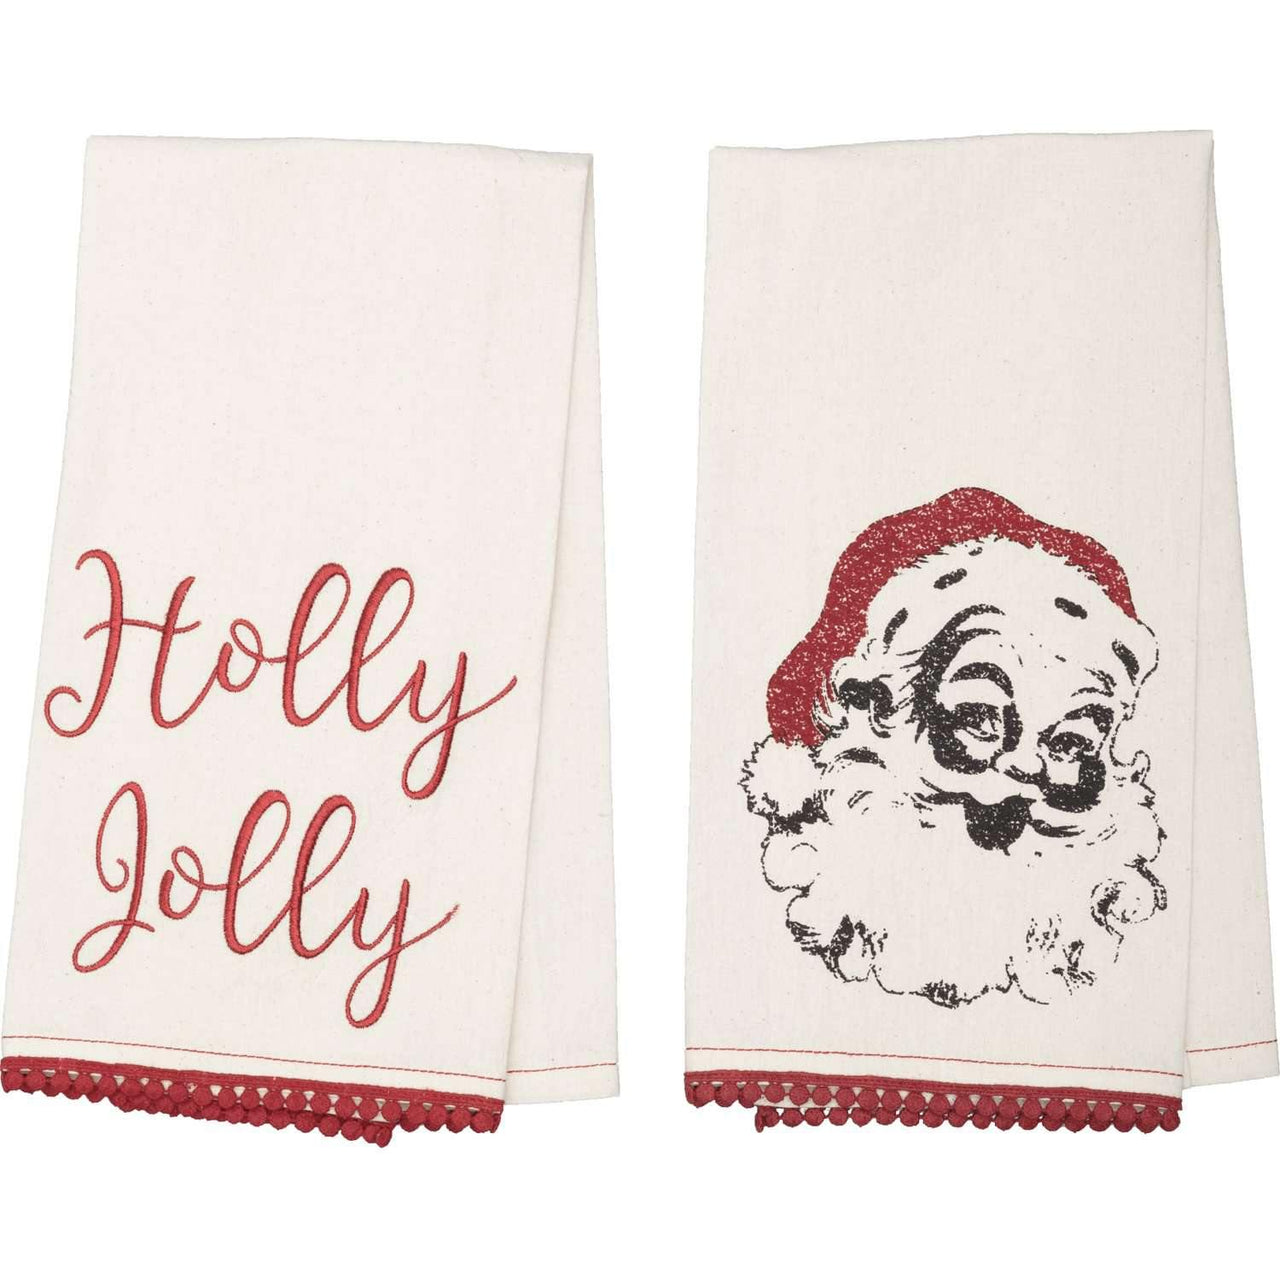 Chenille Christmas Holly Jolly Bleached White Muslin Tea Towel Set of 2 19x28 VHC Brands - The Fox Decor